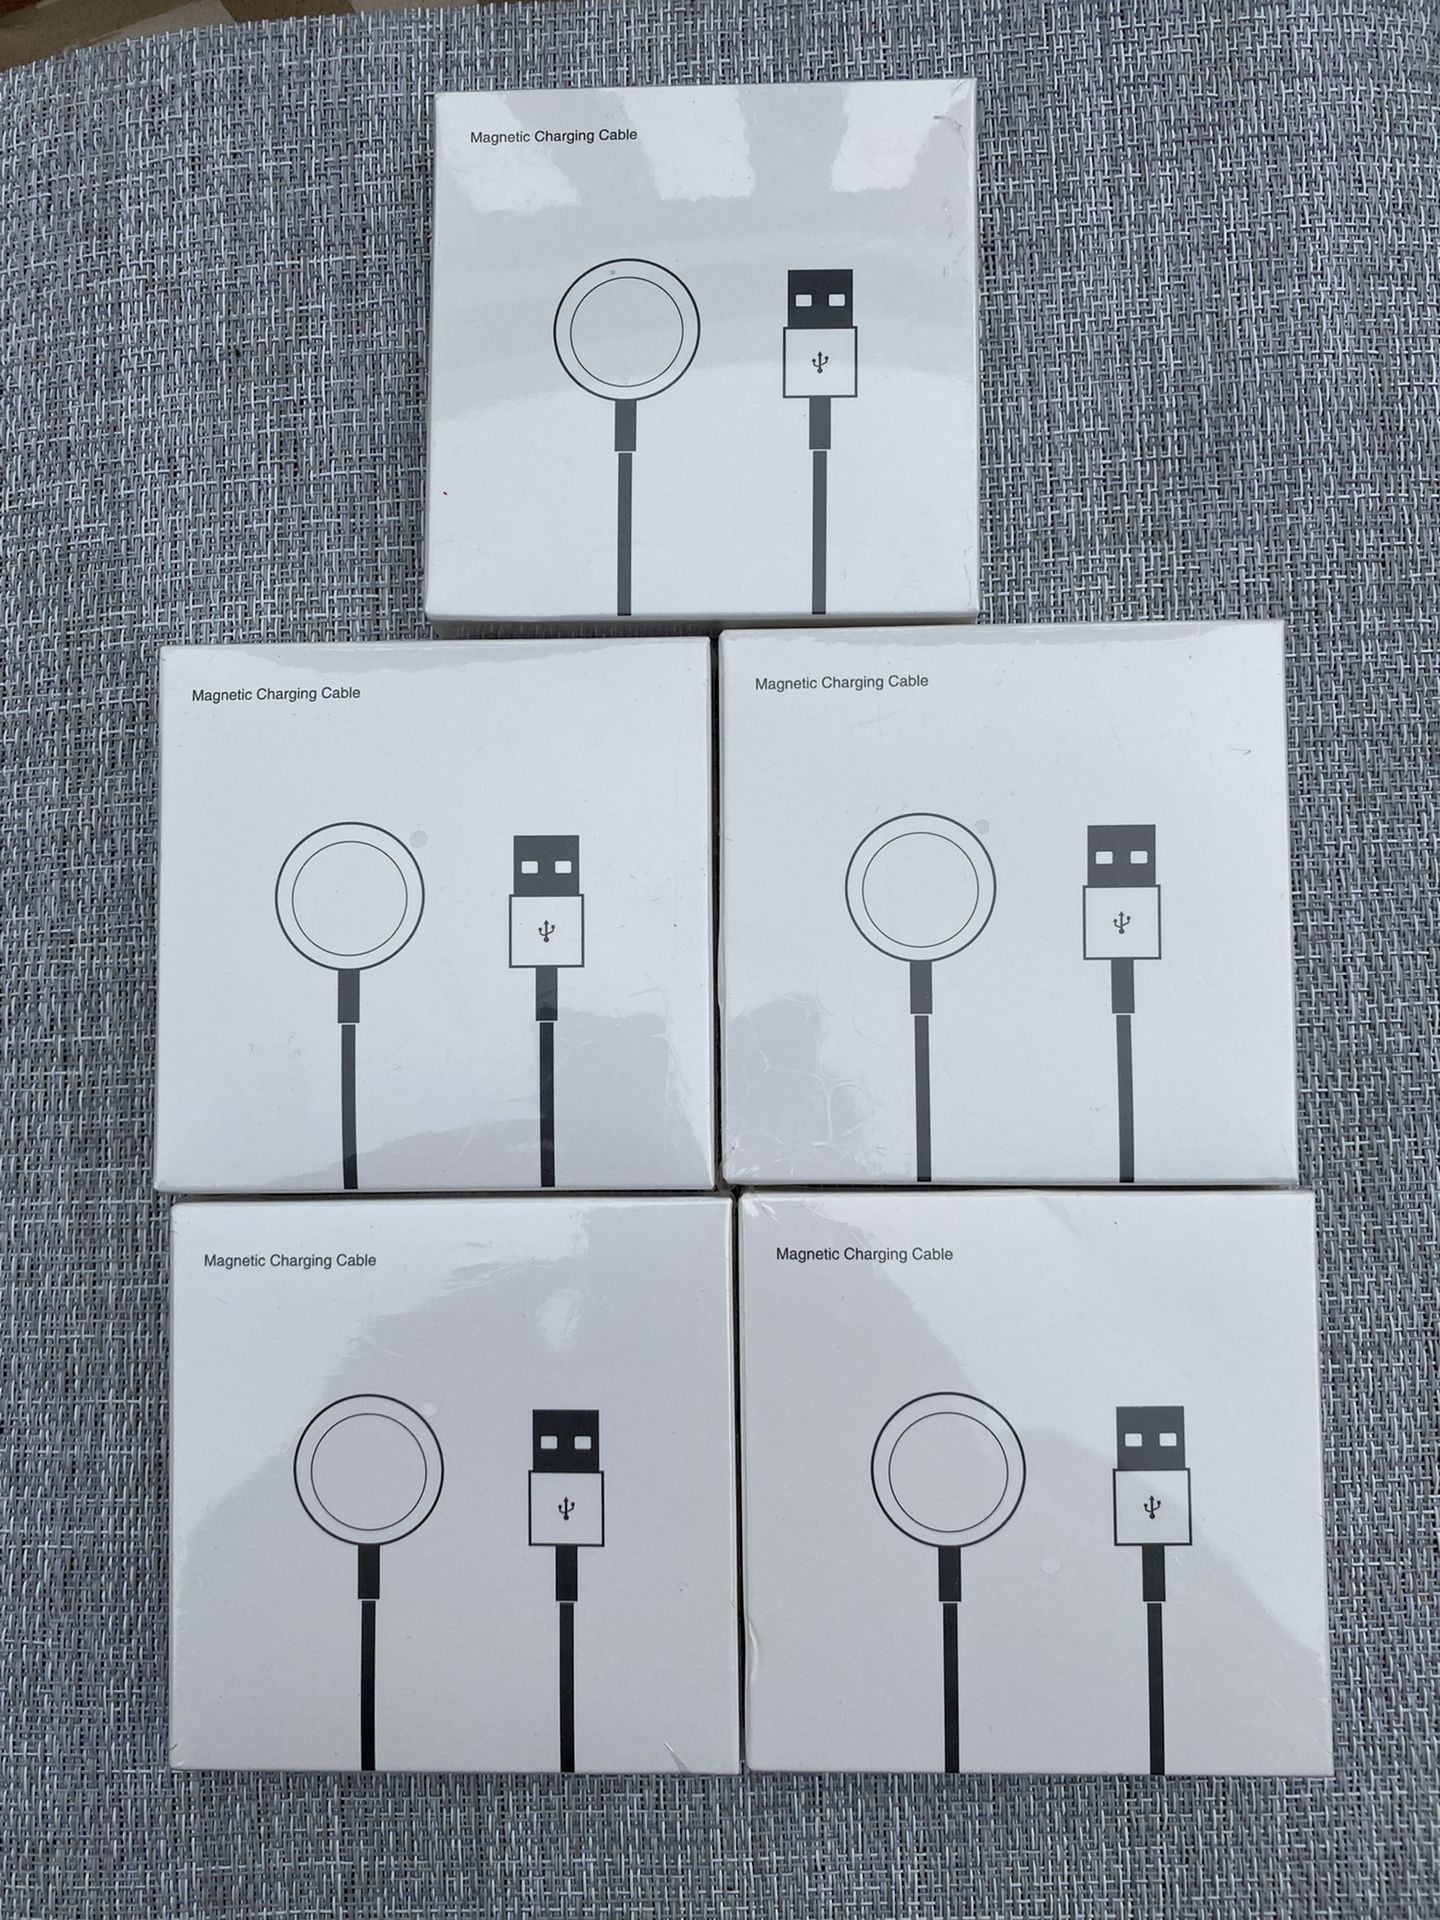 $10  Each Compatible with Apple Watch Charger, Magnetic Charging Cable Cord Compatible with Apple Watch Series Se, 6, 5, 4, 3, 2, 1